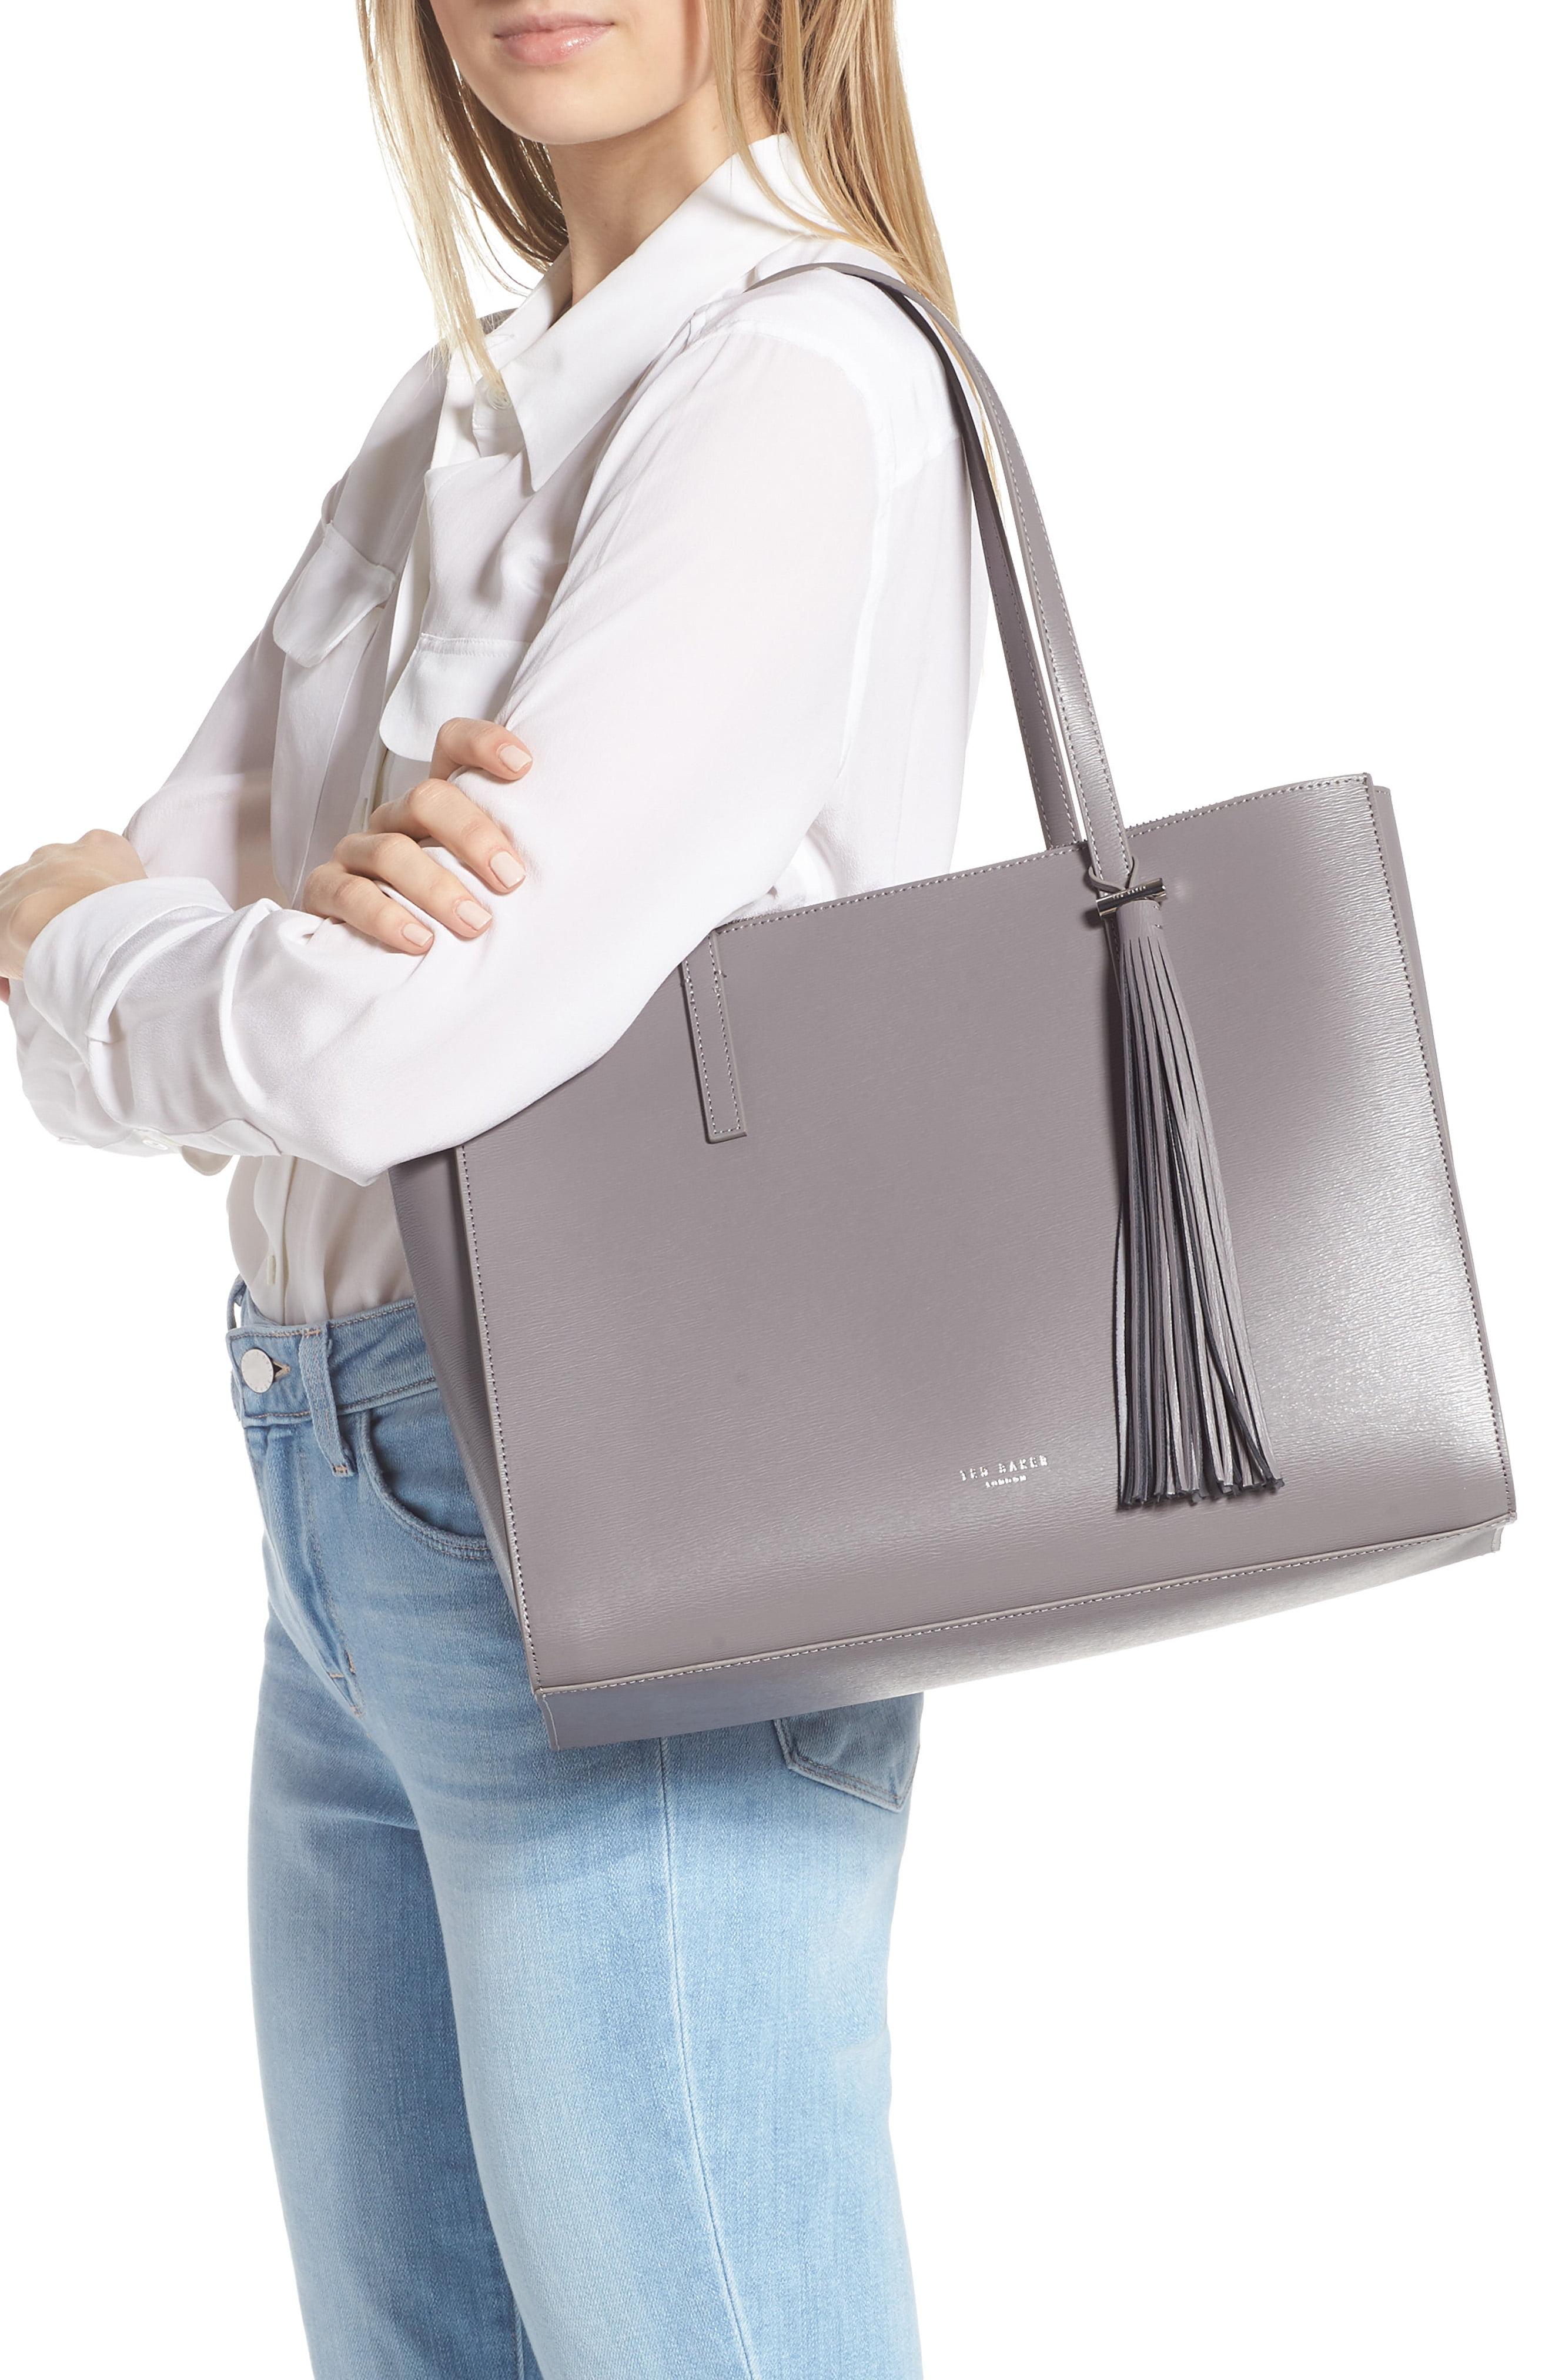 Ted Baker Large Narissa Leather Tote in dk-Grey (Gray) - Lyst